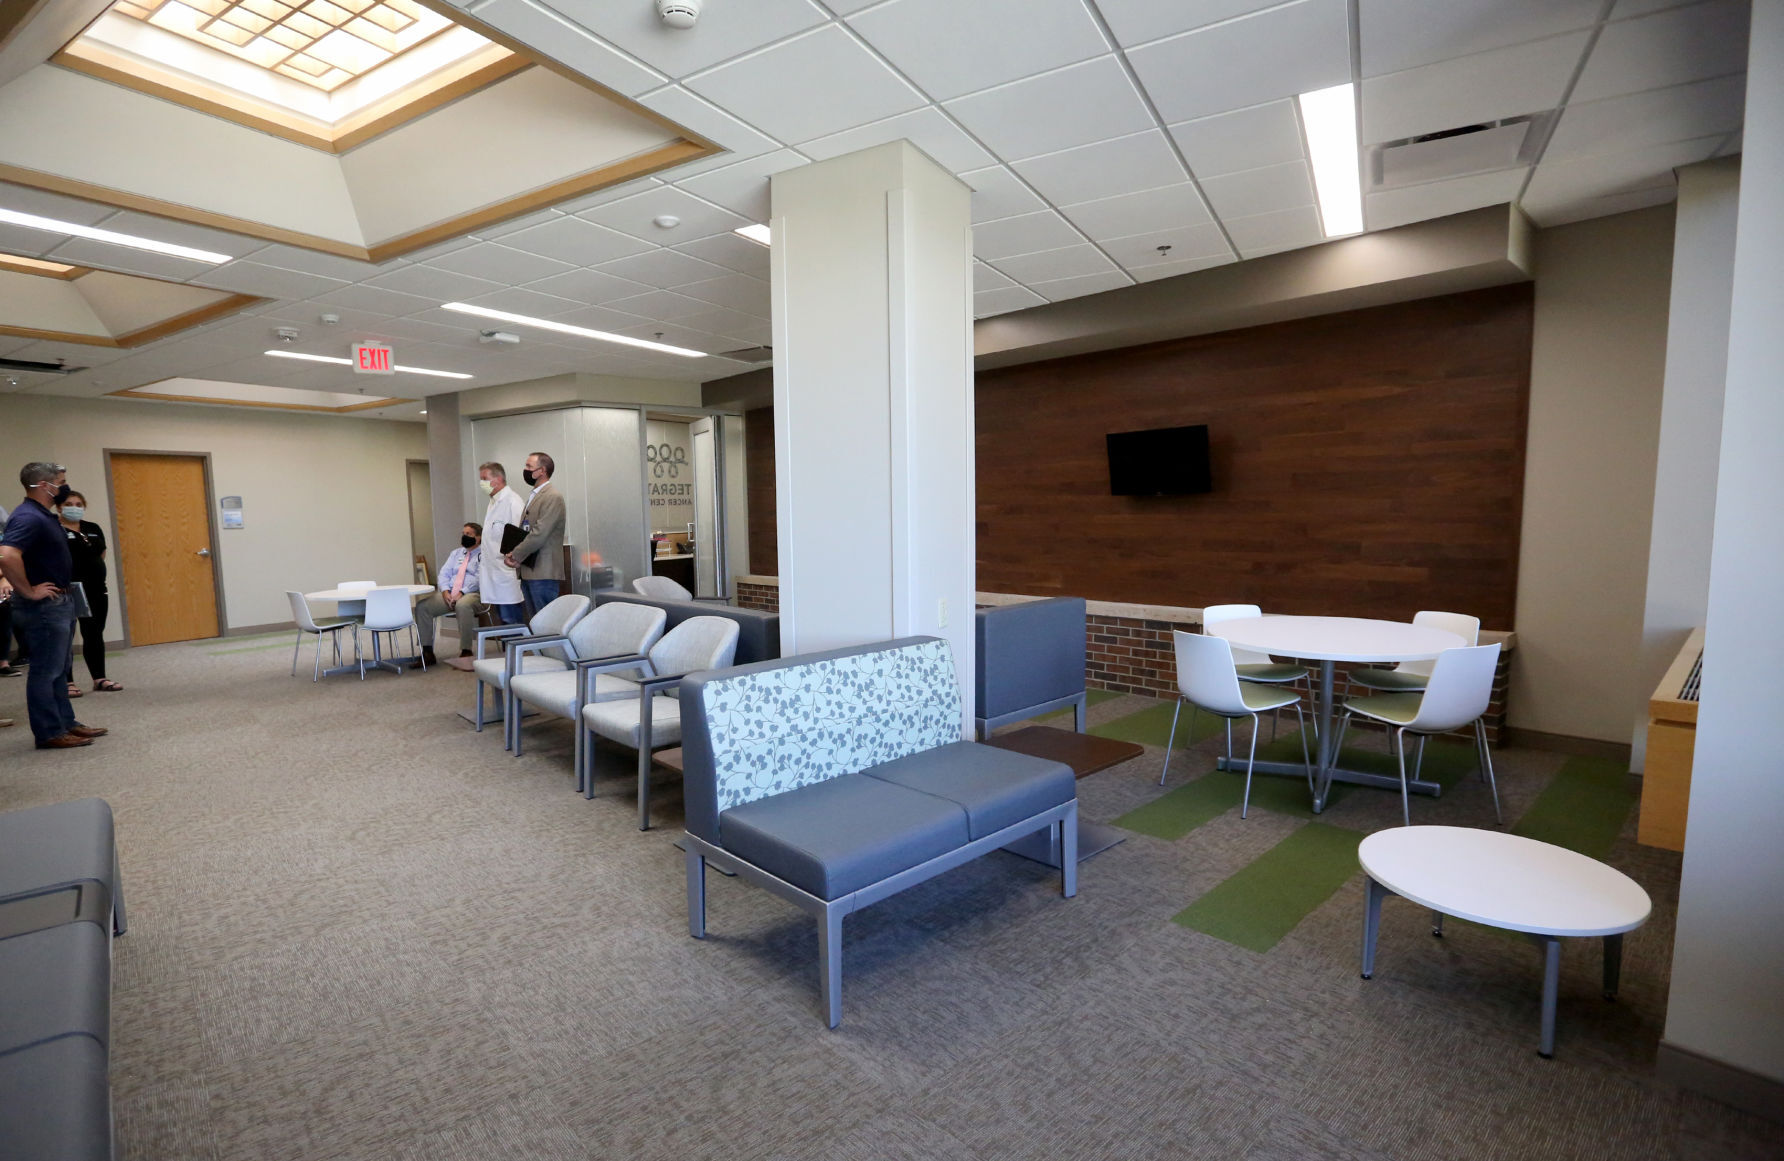 A waiting area at the new Integrated Cancer Center in Dubuque on Friday, Sept. 25, 2020. The center is a collaboration between UnityPoint Health-Finley Hospital and Grand River Medical Group and will be located on Finley